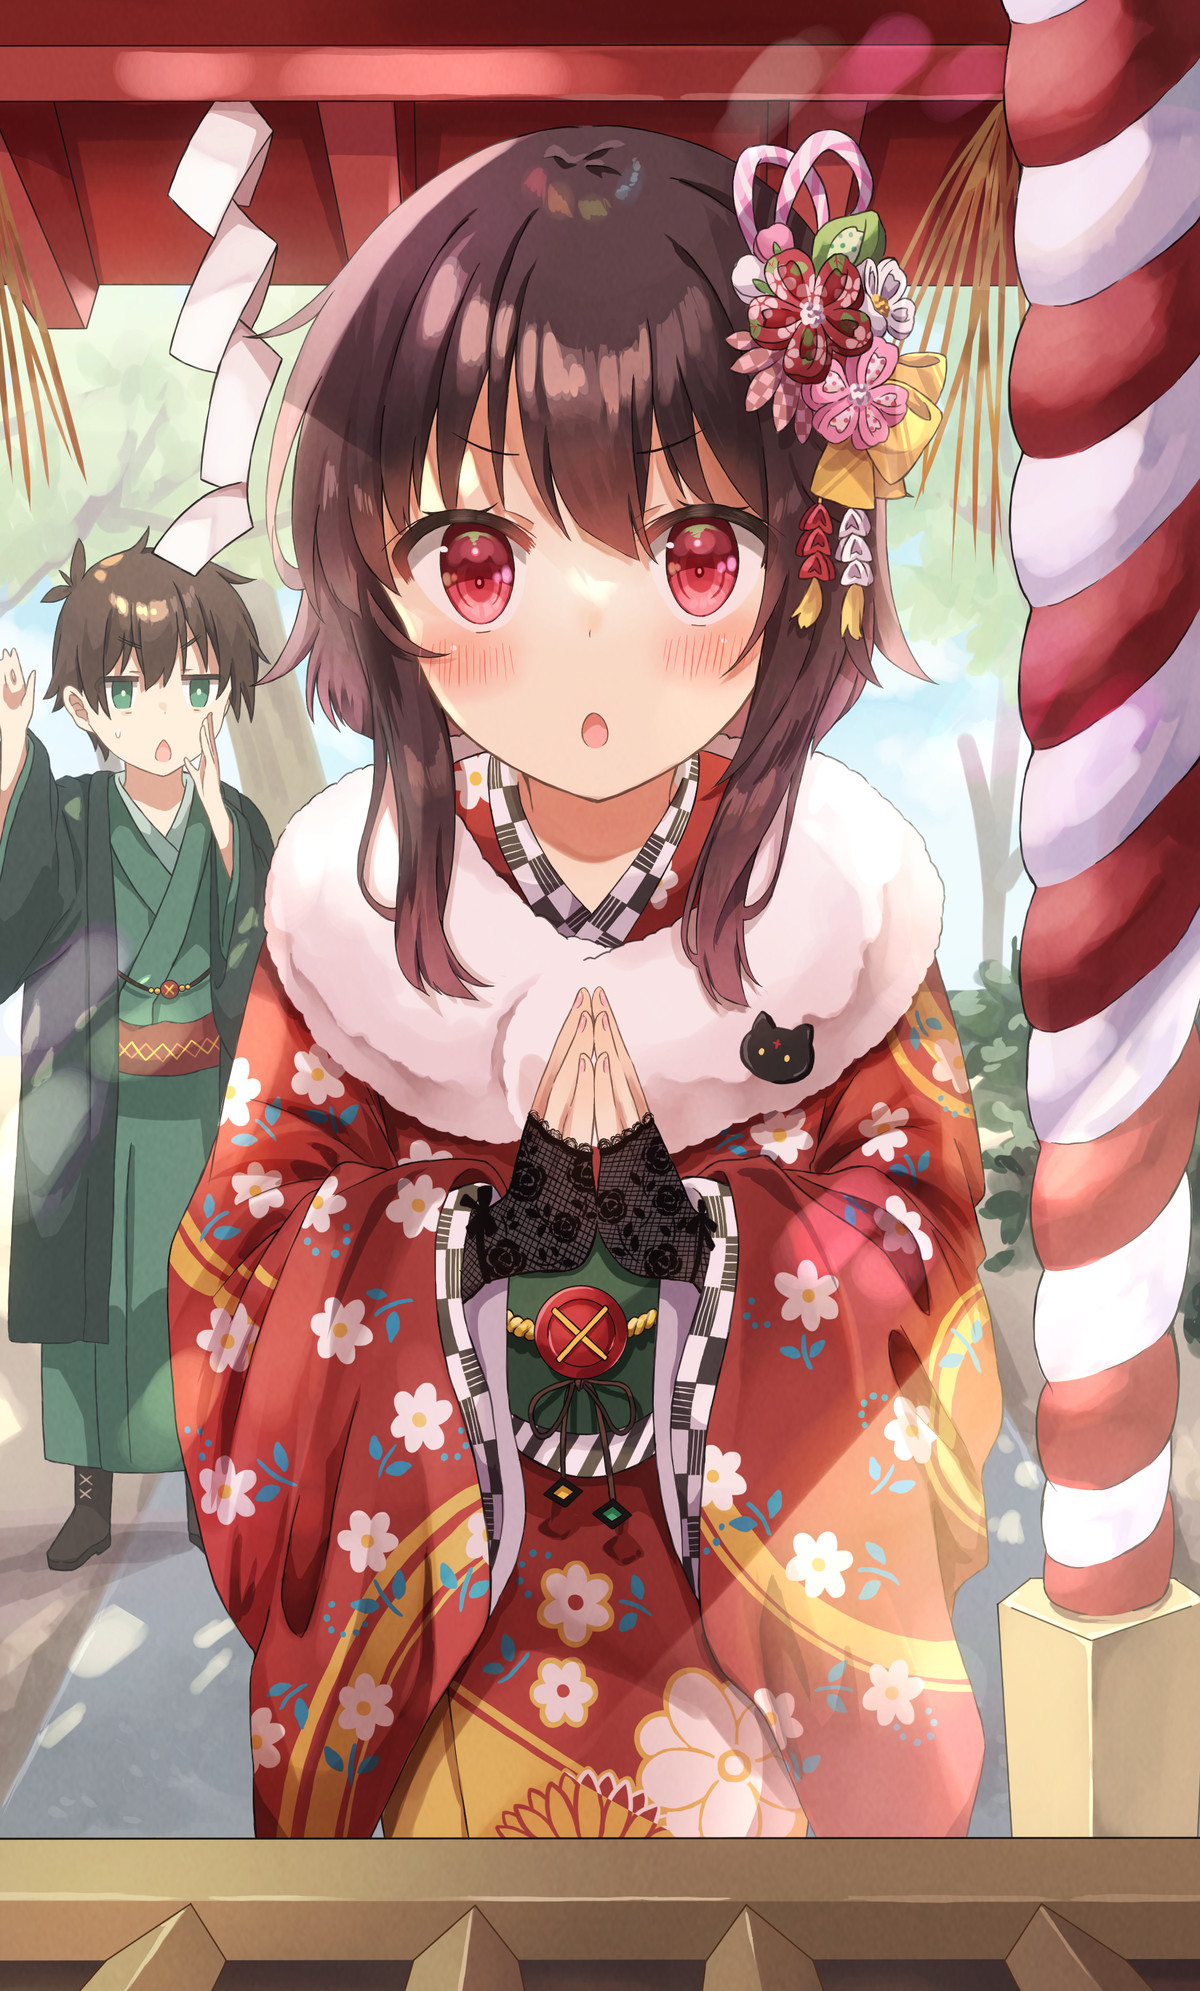 Daily Megu - 1054: Shrine Megu. join list: DailySplosion (824 subs)Mention History Source: .. praying for even more powerful explosion magic i'd assume